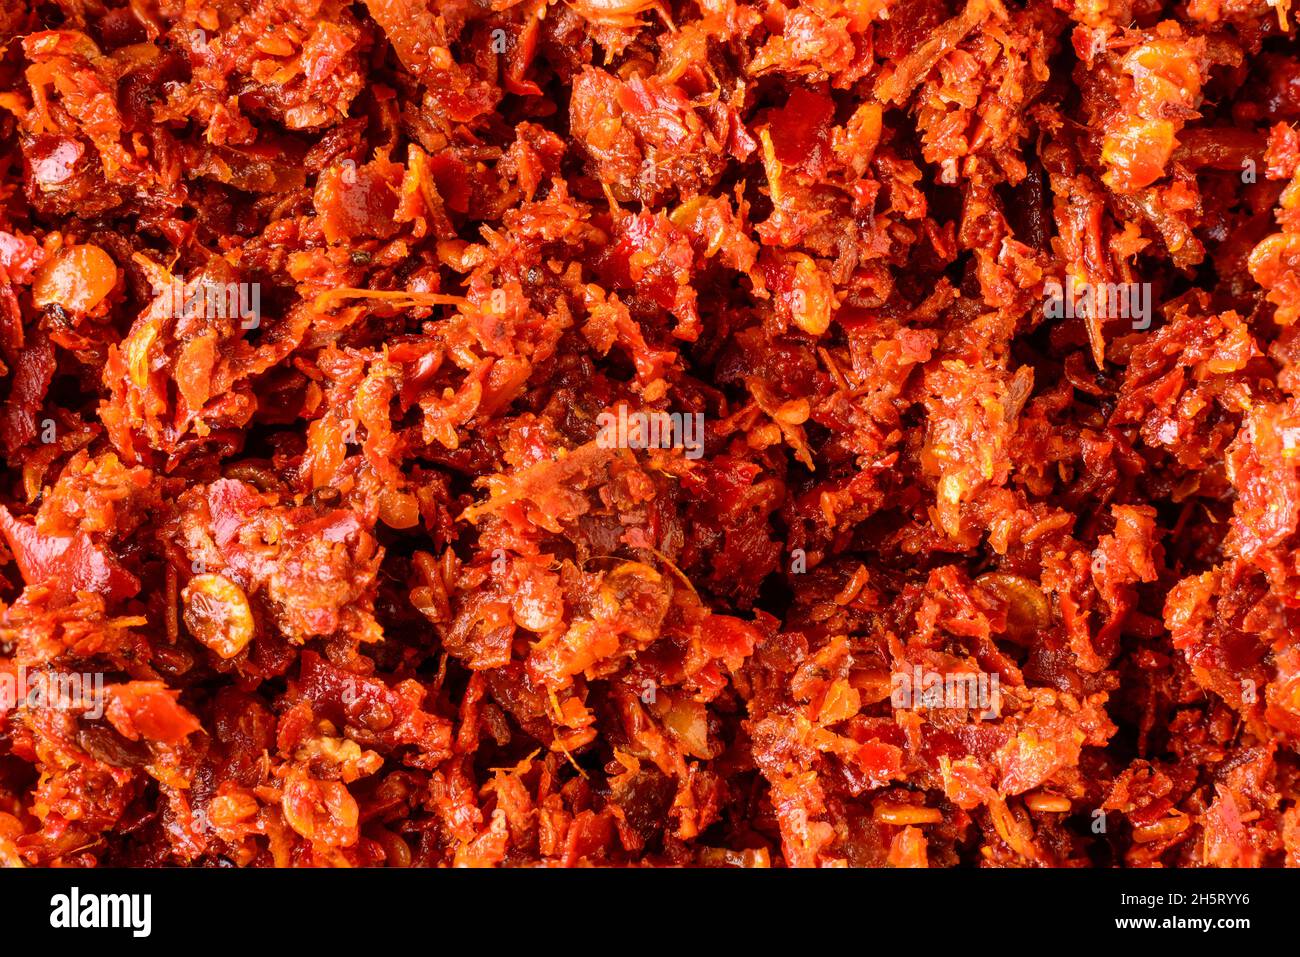 spicy maldives fish chips or flakes condiment, made with chili peppers, tomato, ginger, garlic and salt, fresh food background texture, closeup Stock Photo